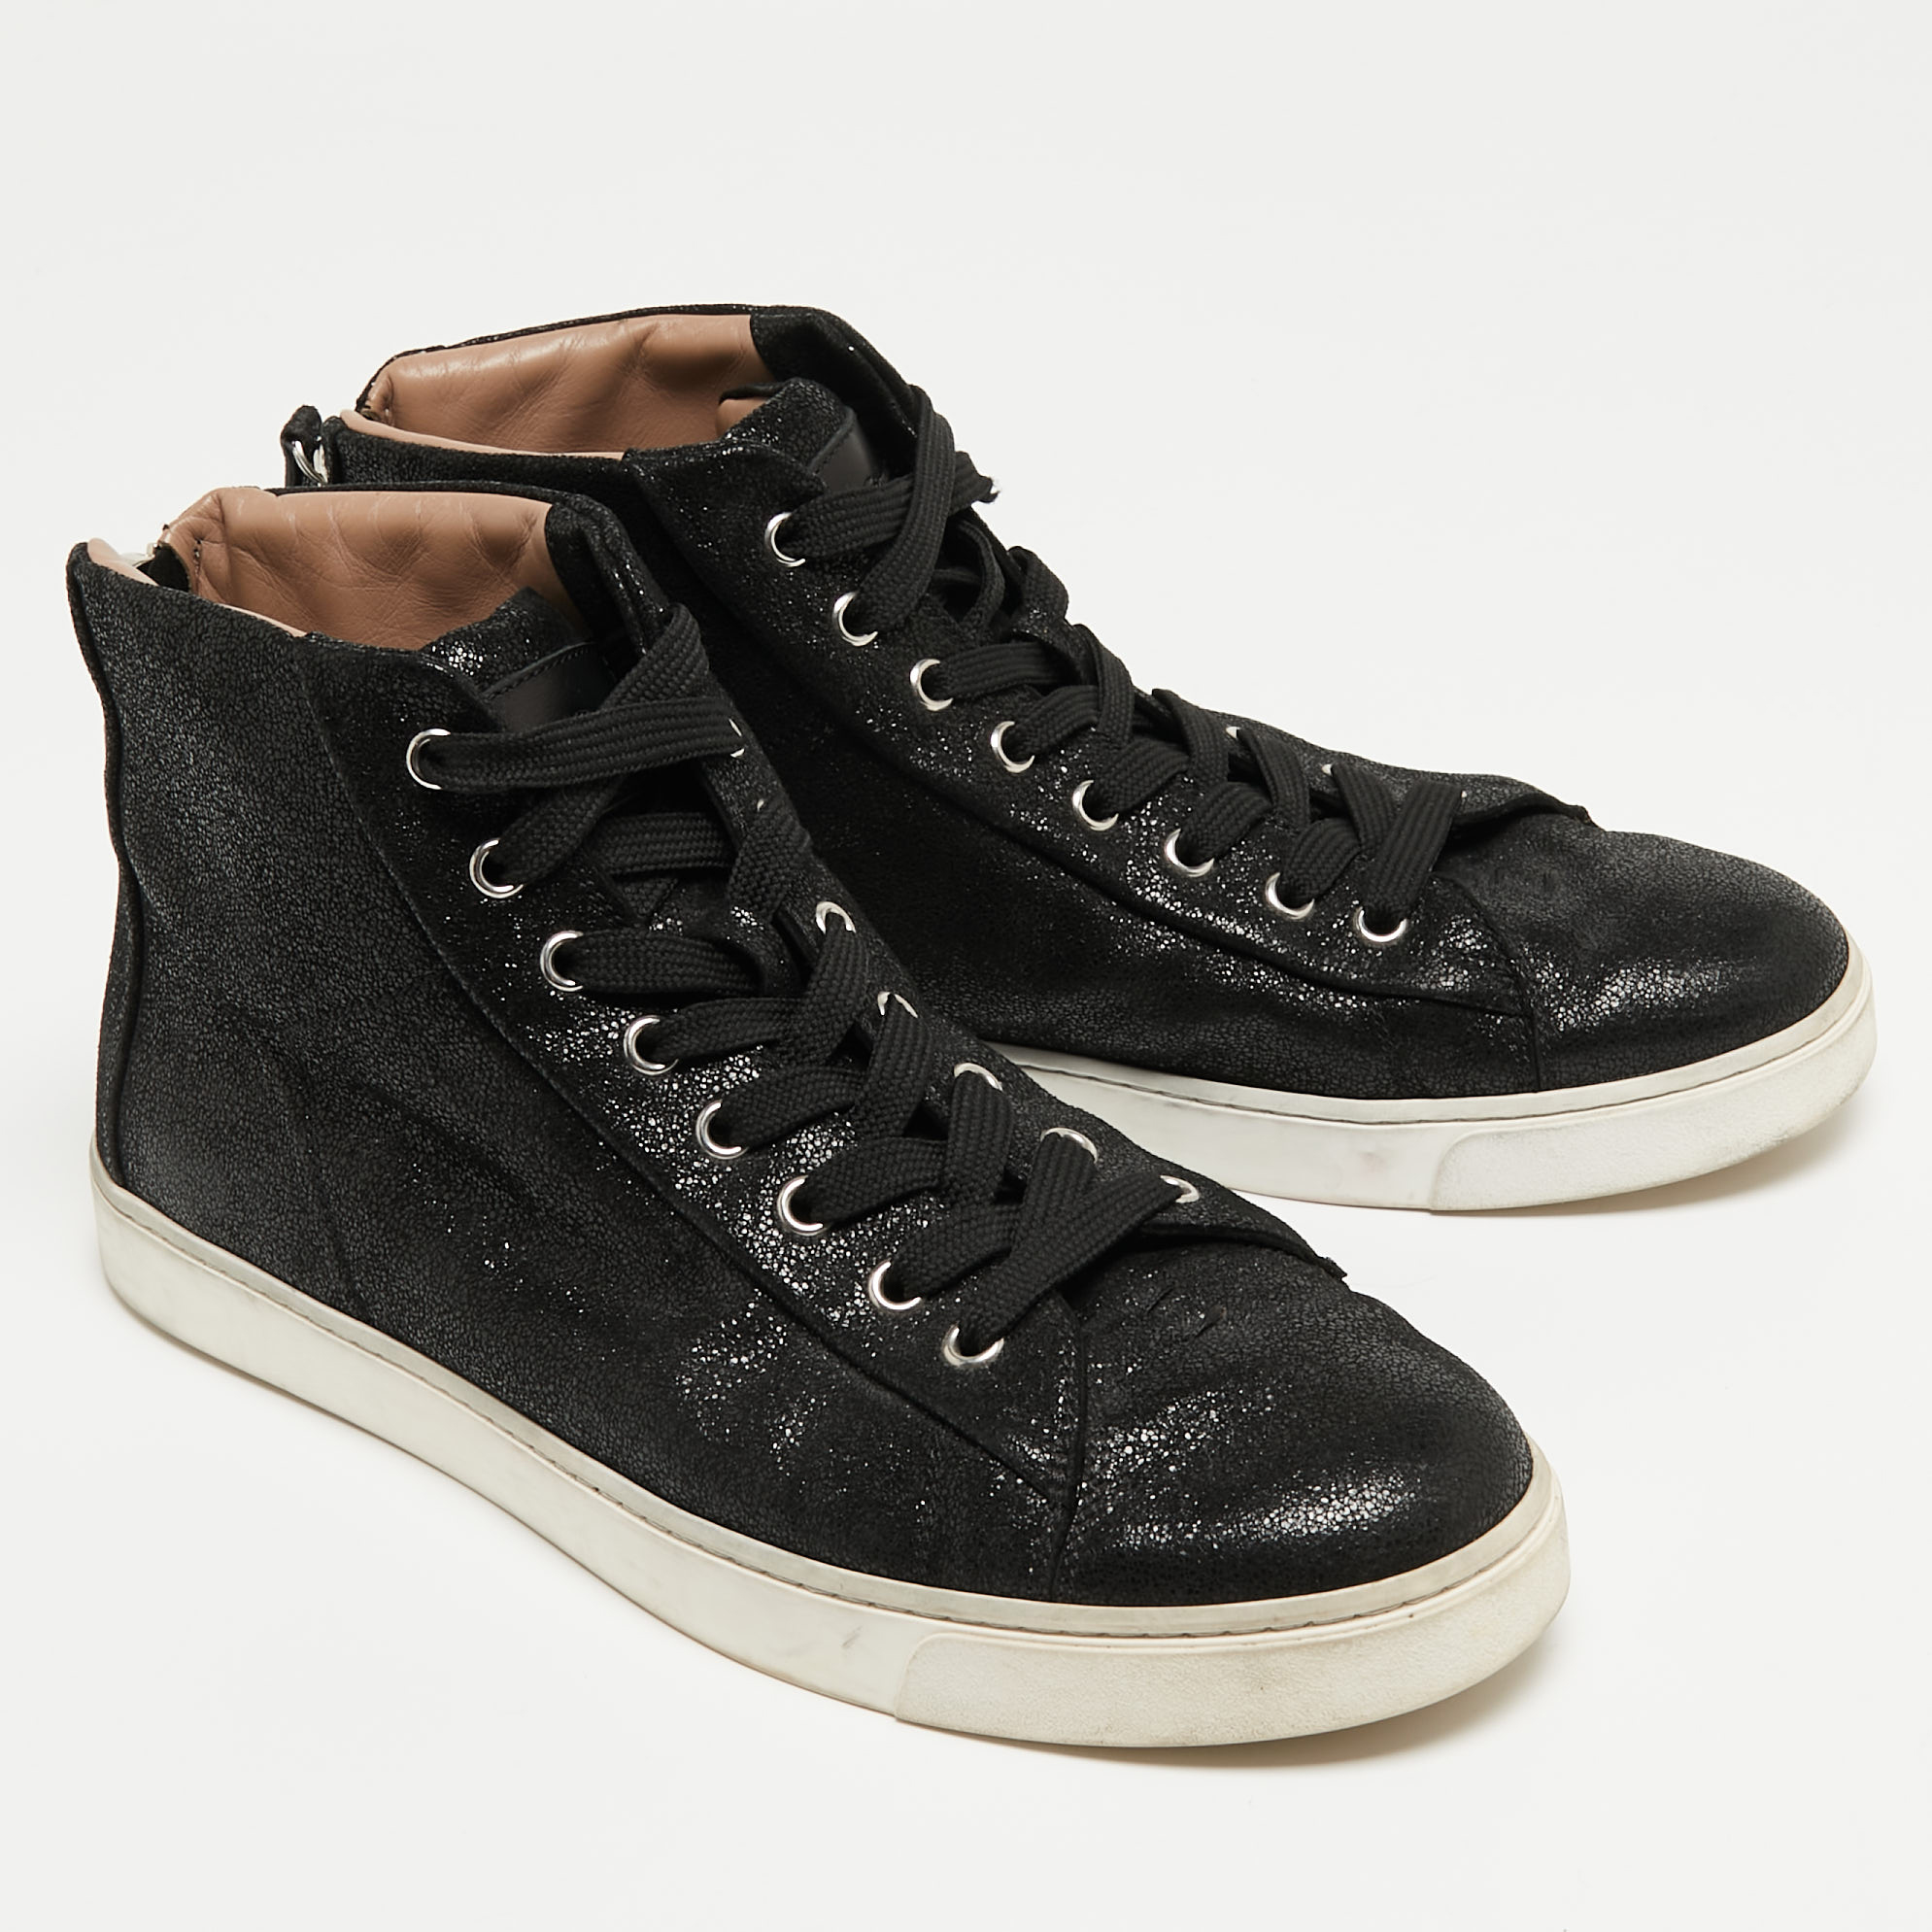 Gianvito Rossi Black Textured Suede High Top Sneakers Size 40